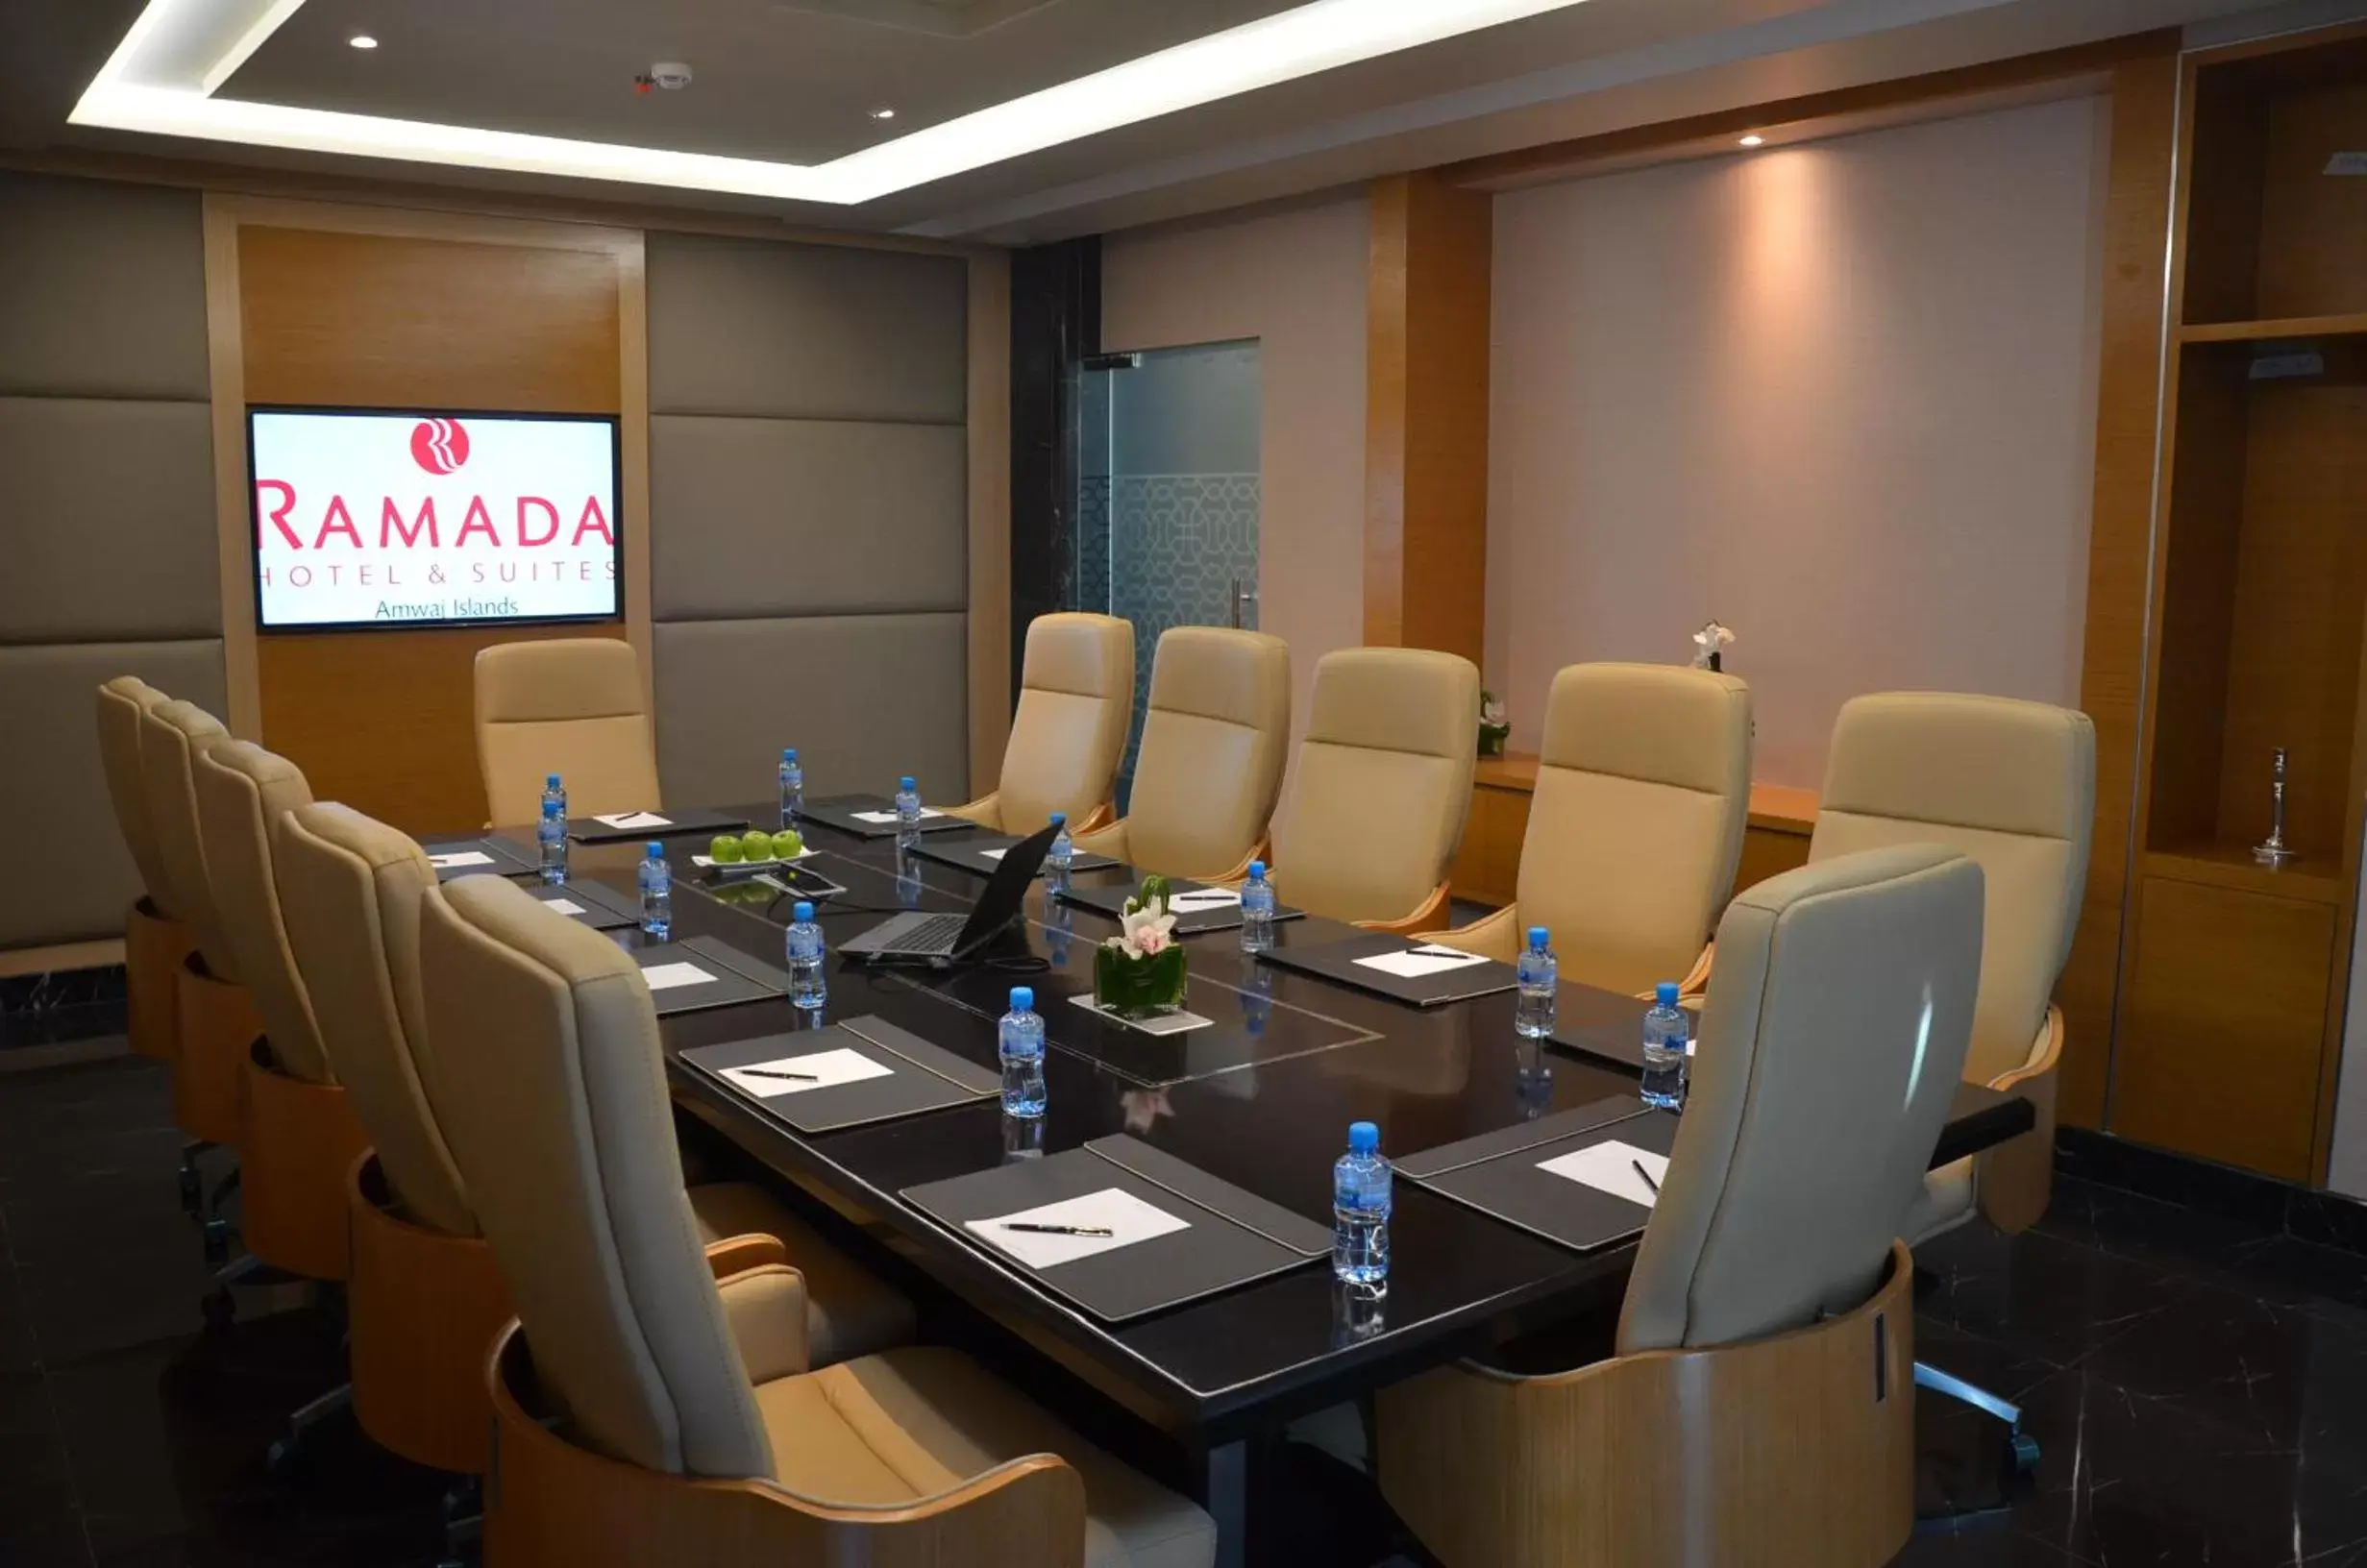 Meeting/conference room, Business Area/Conference Room in Ramada Hotel and Suites Amwaj Islands